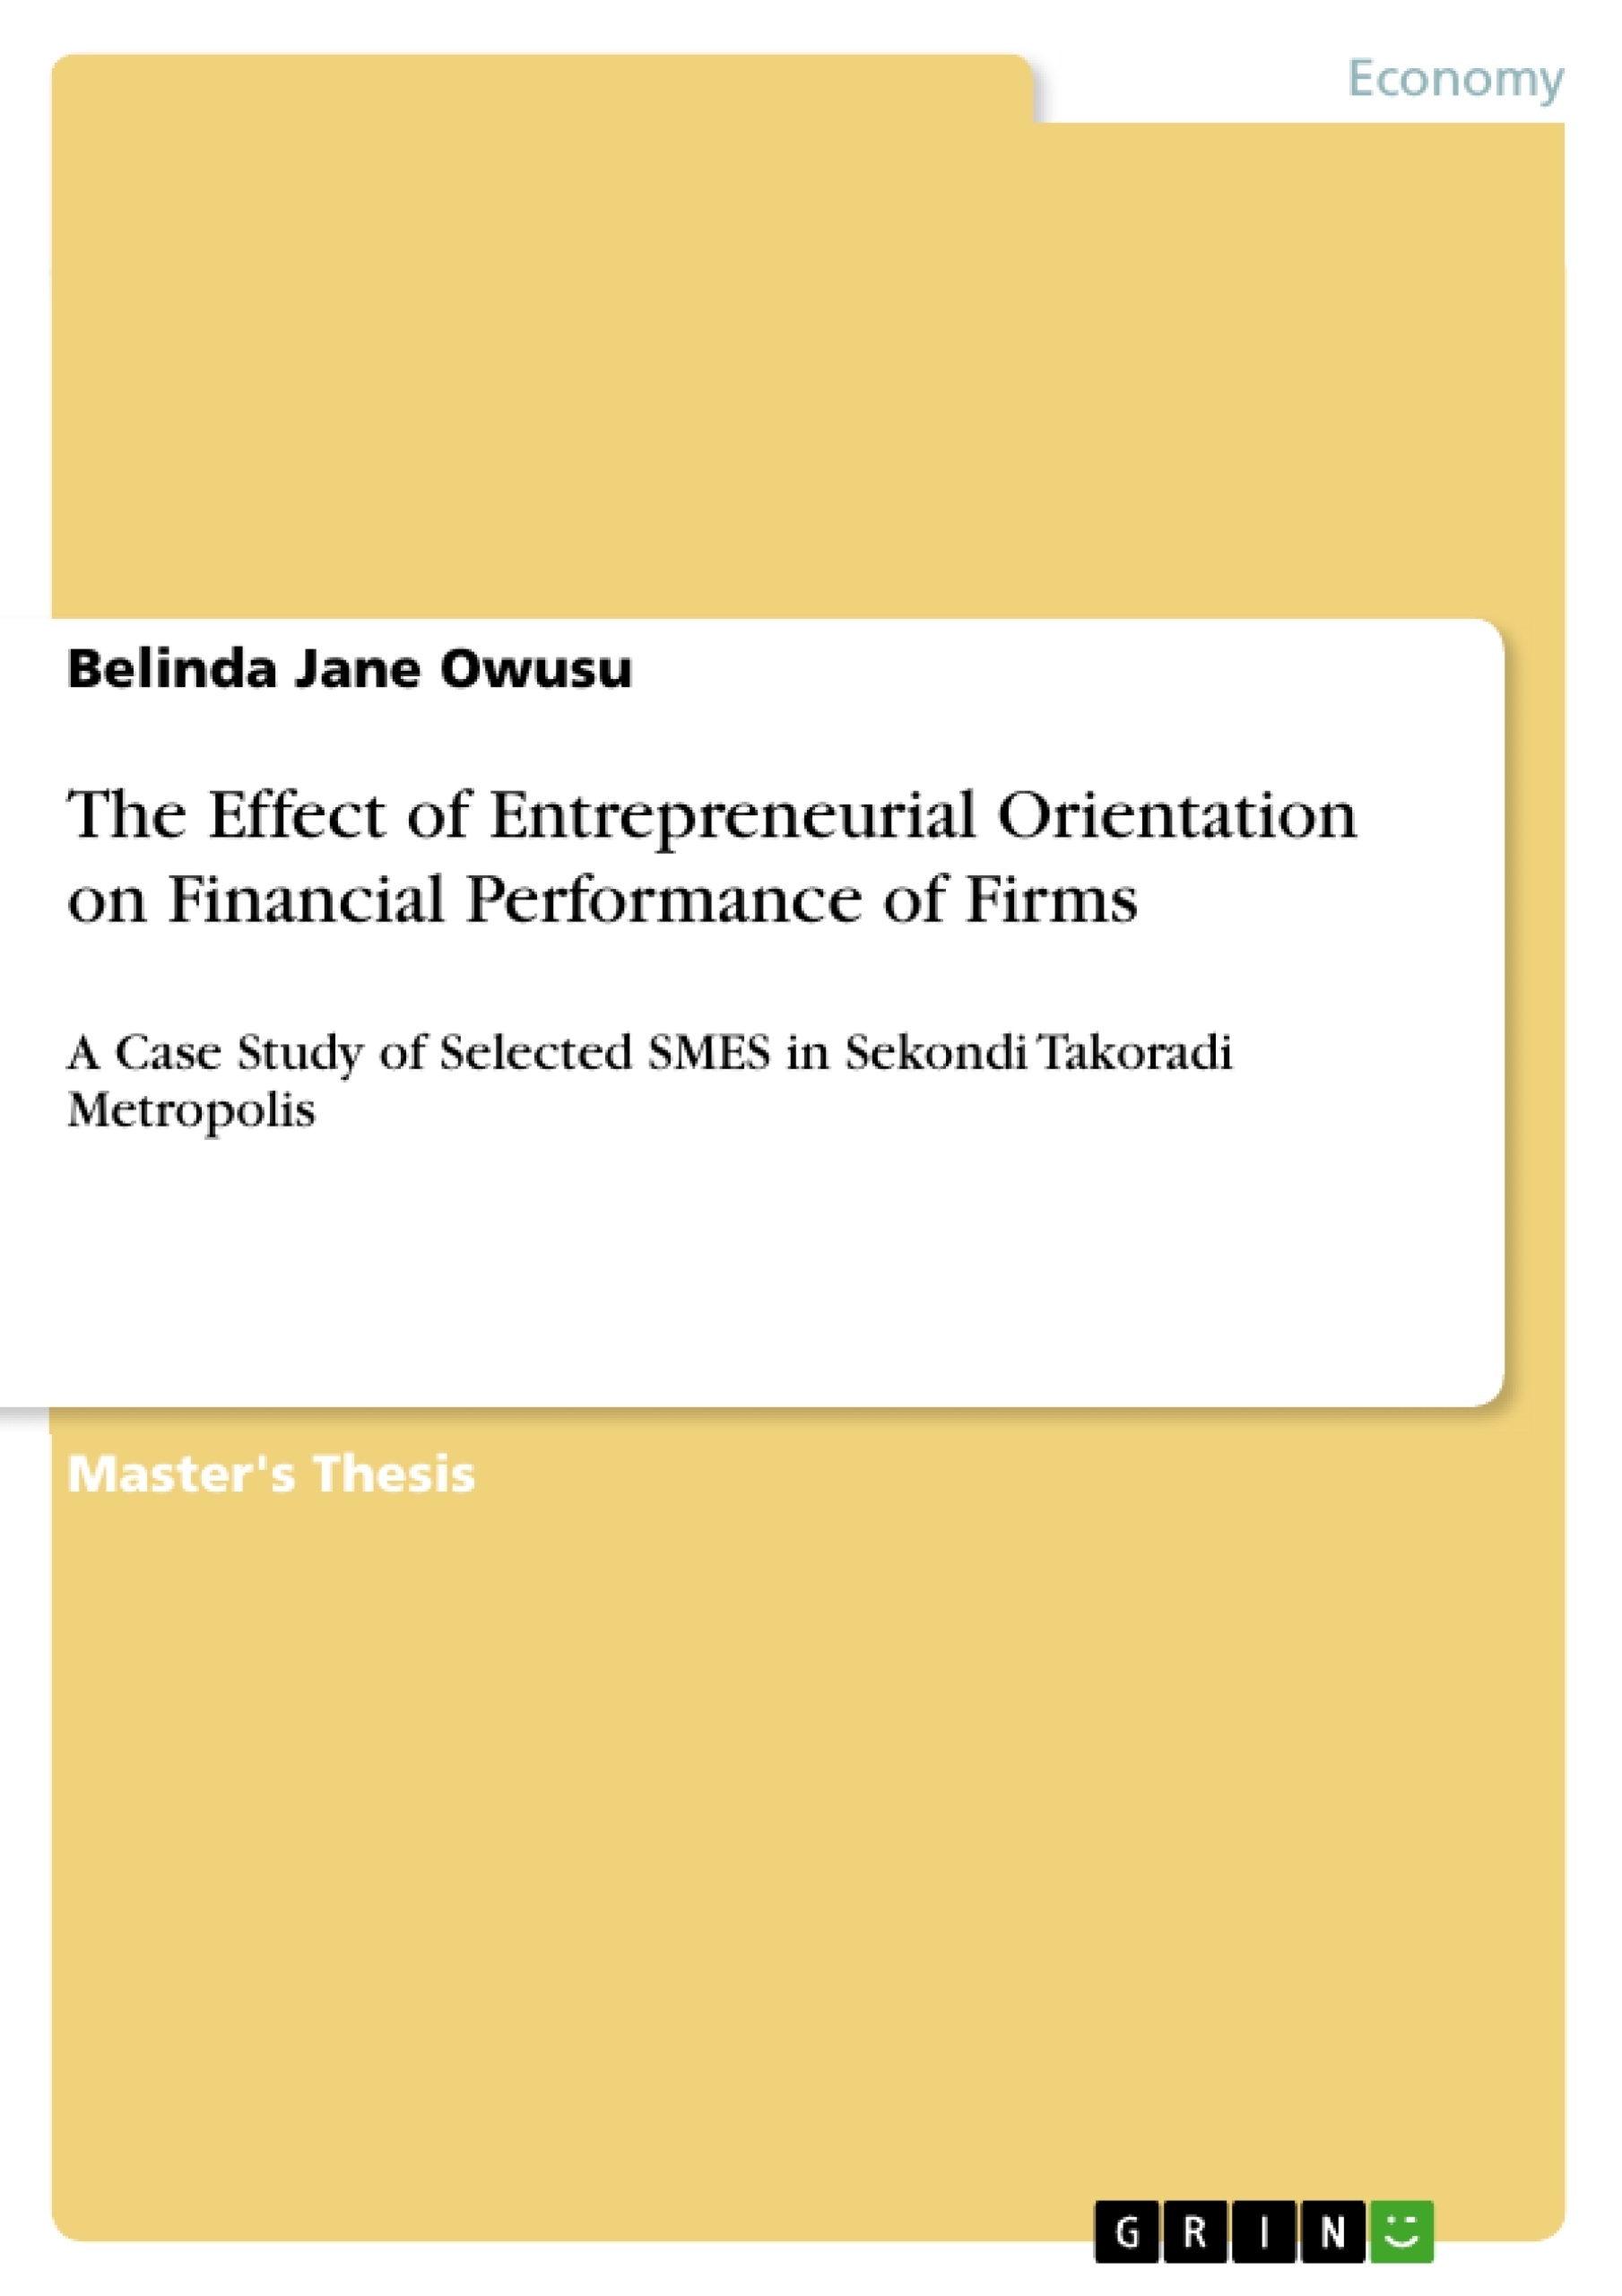 Title: The Effect of Entrepreneurial Orientation on Financial Performance of Firms